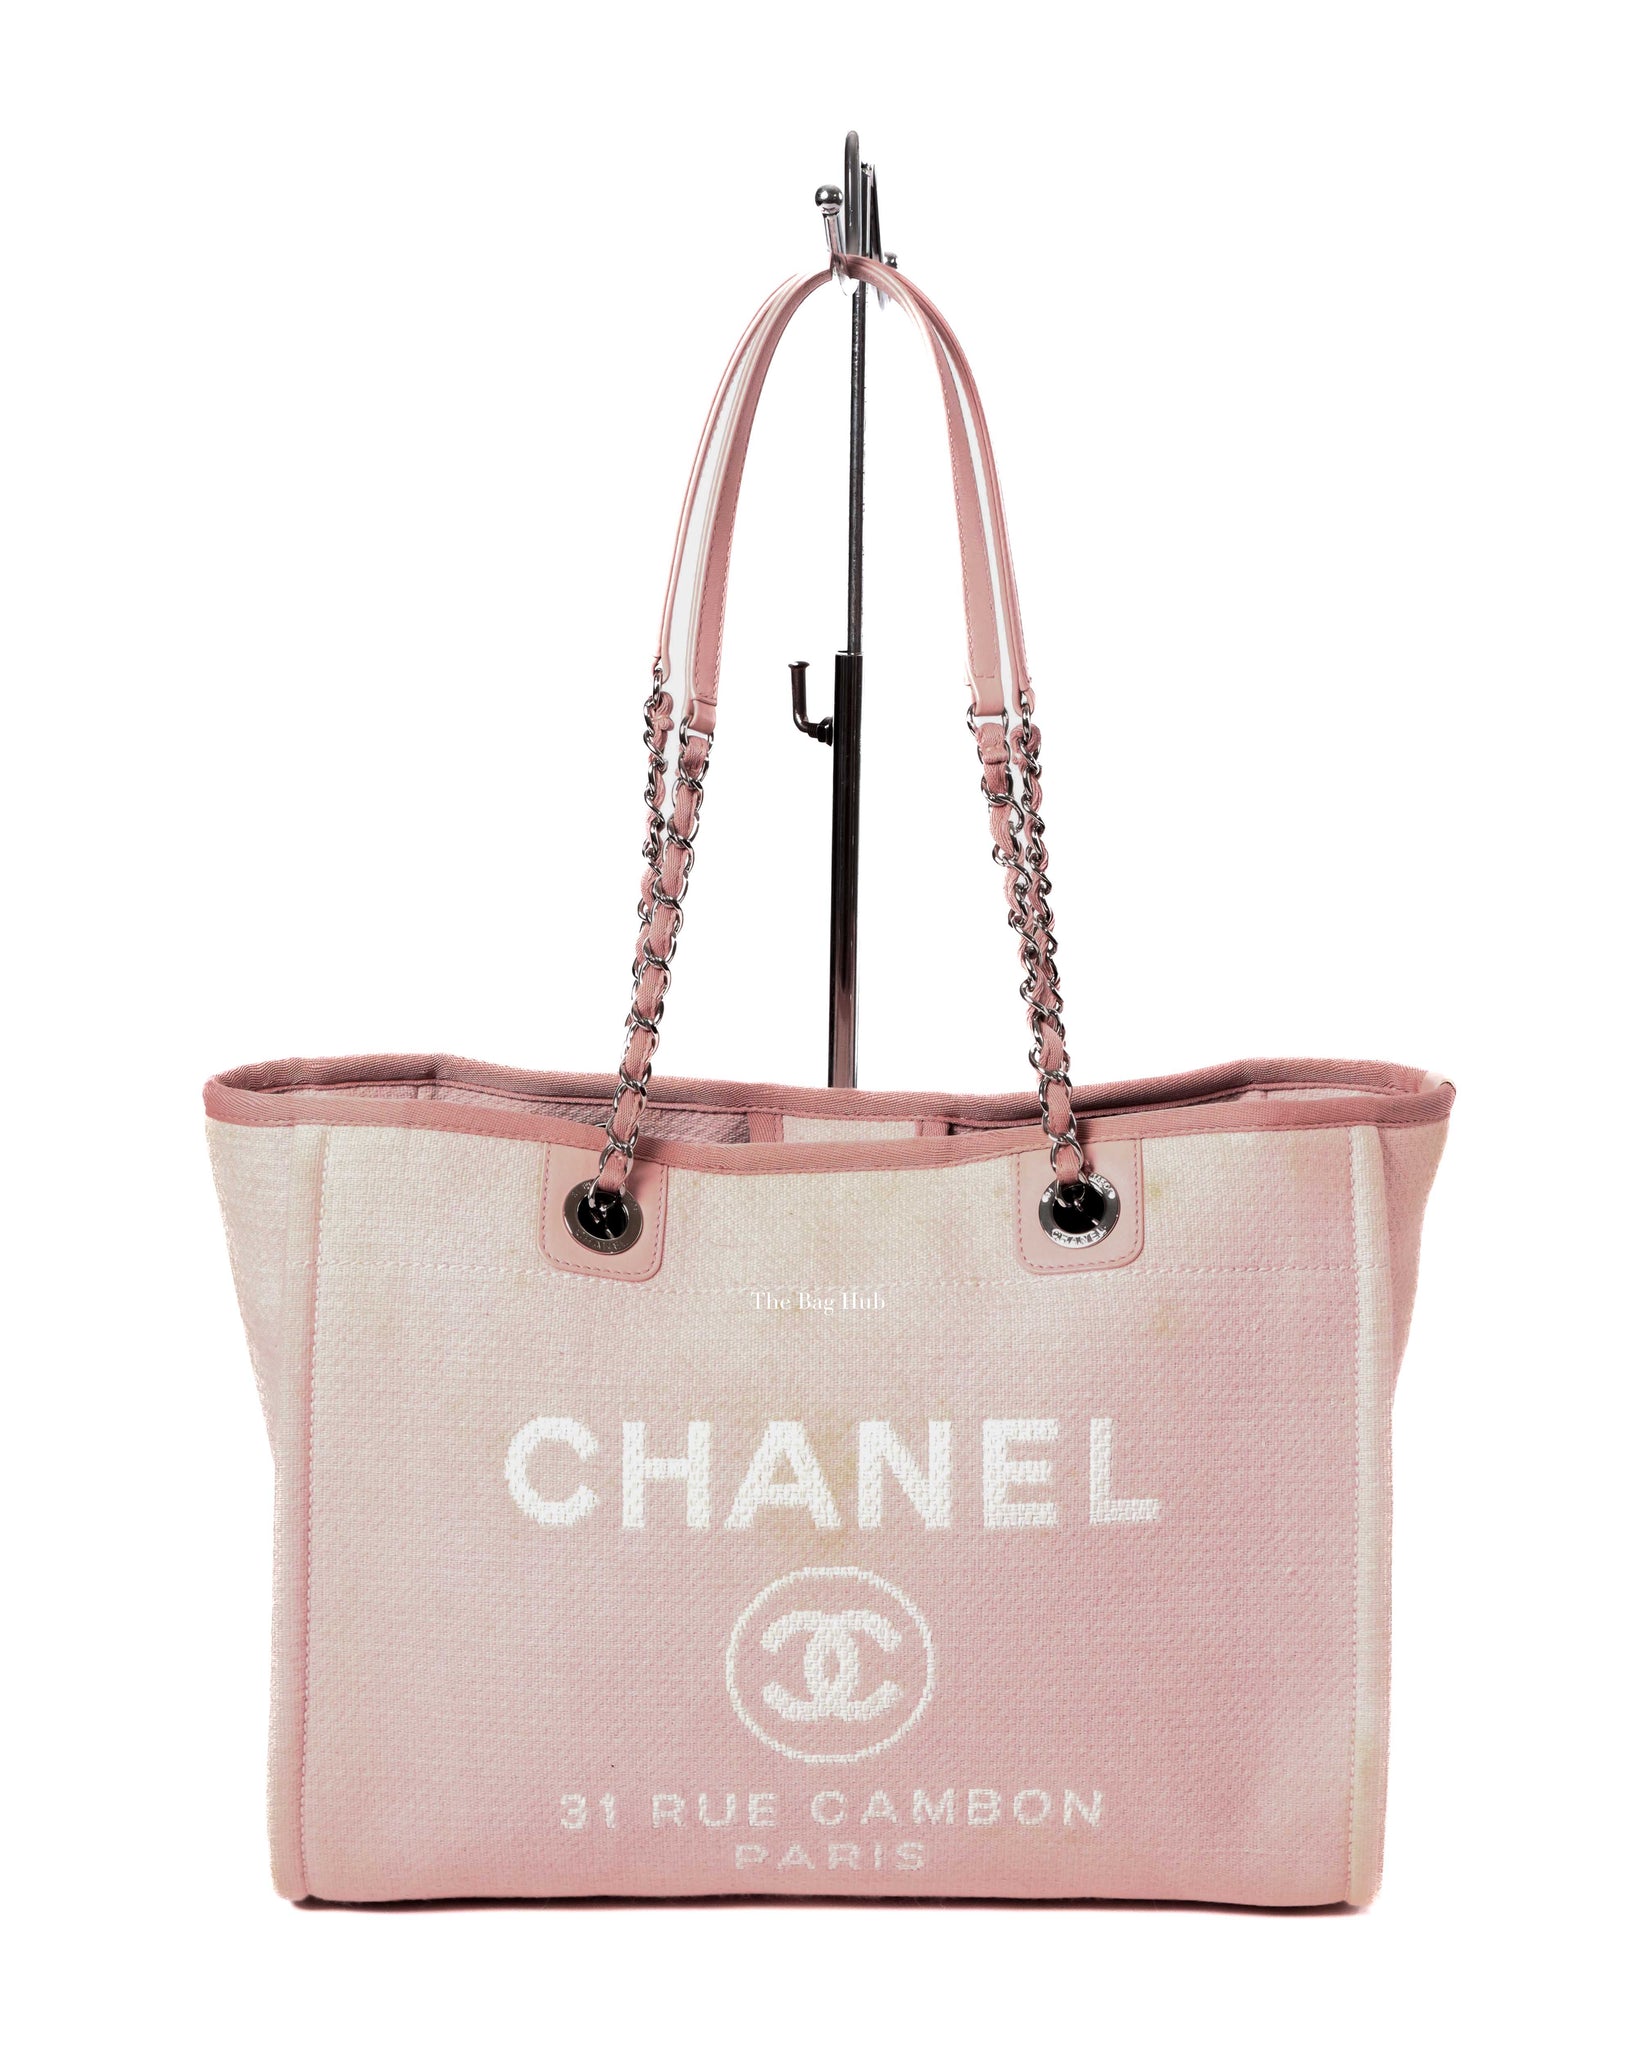 Chanel Pink Canvas Deauville Medium Tote Bag-2